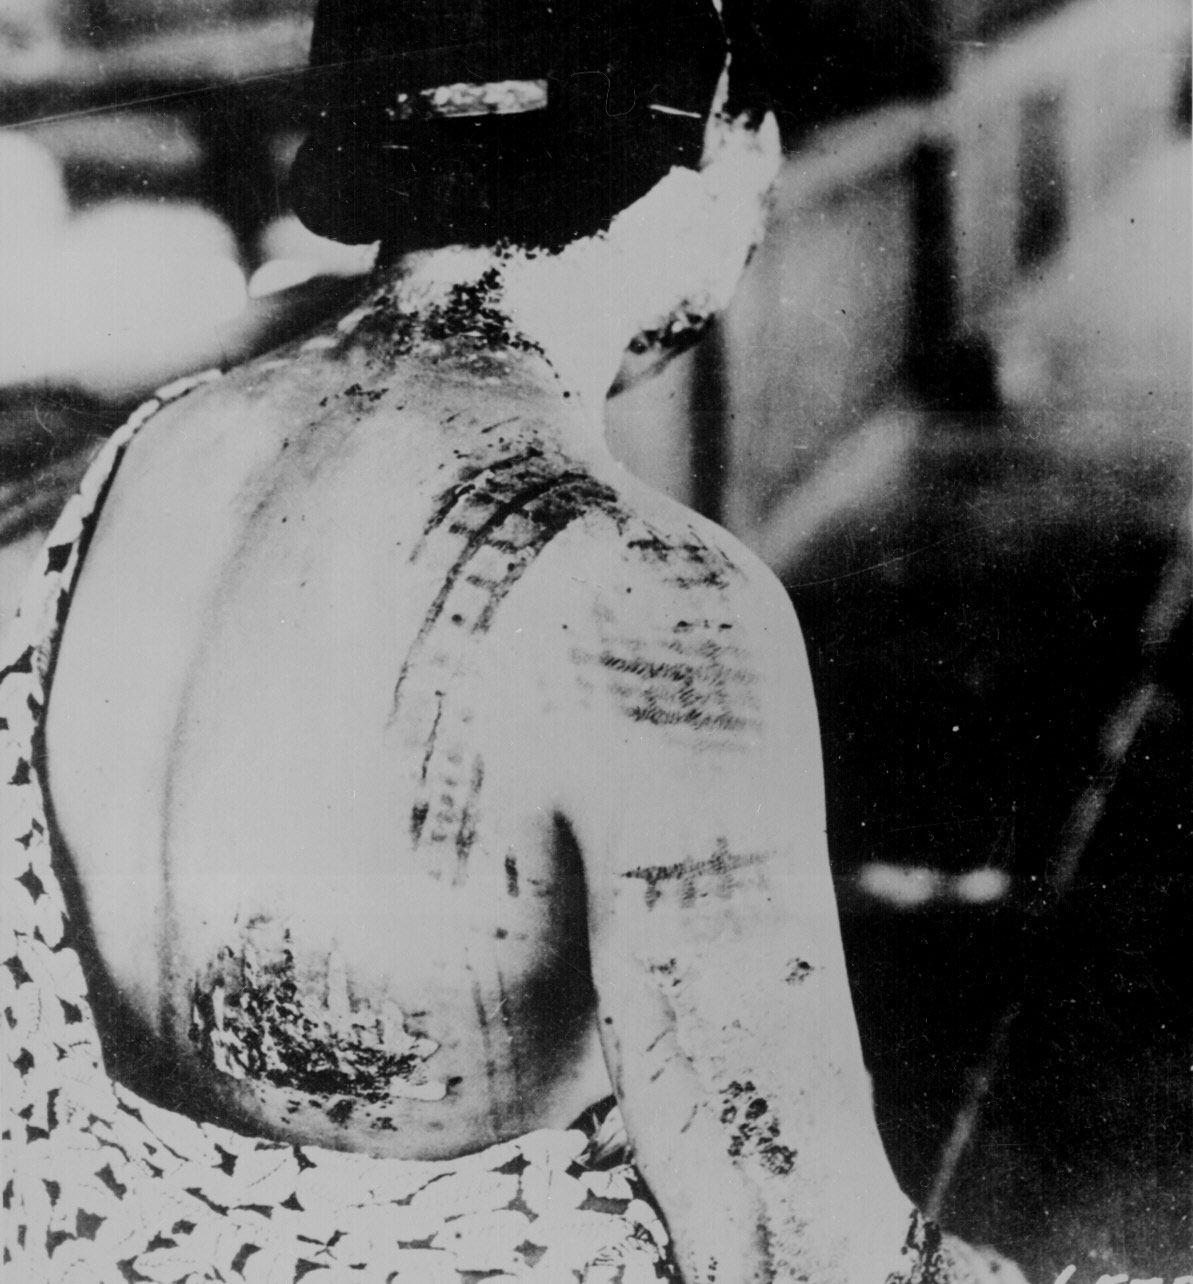 The atomic bomb survivor's skin was burned in a pattern corresponding to the dark portions of her kimono worn at the time of the explosion, Aug 1945